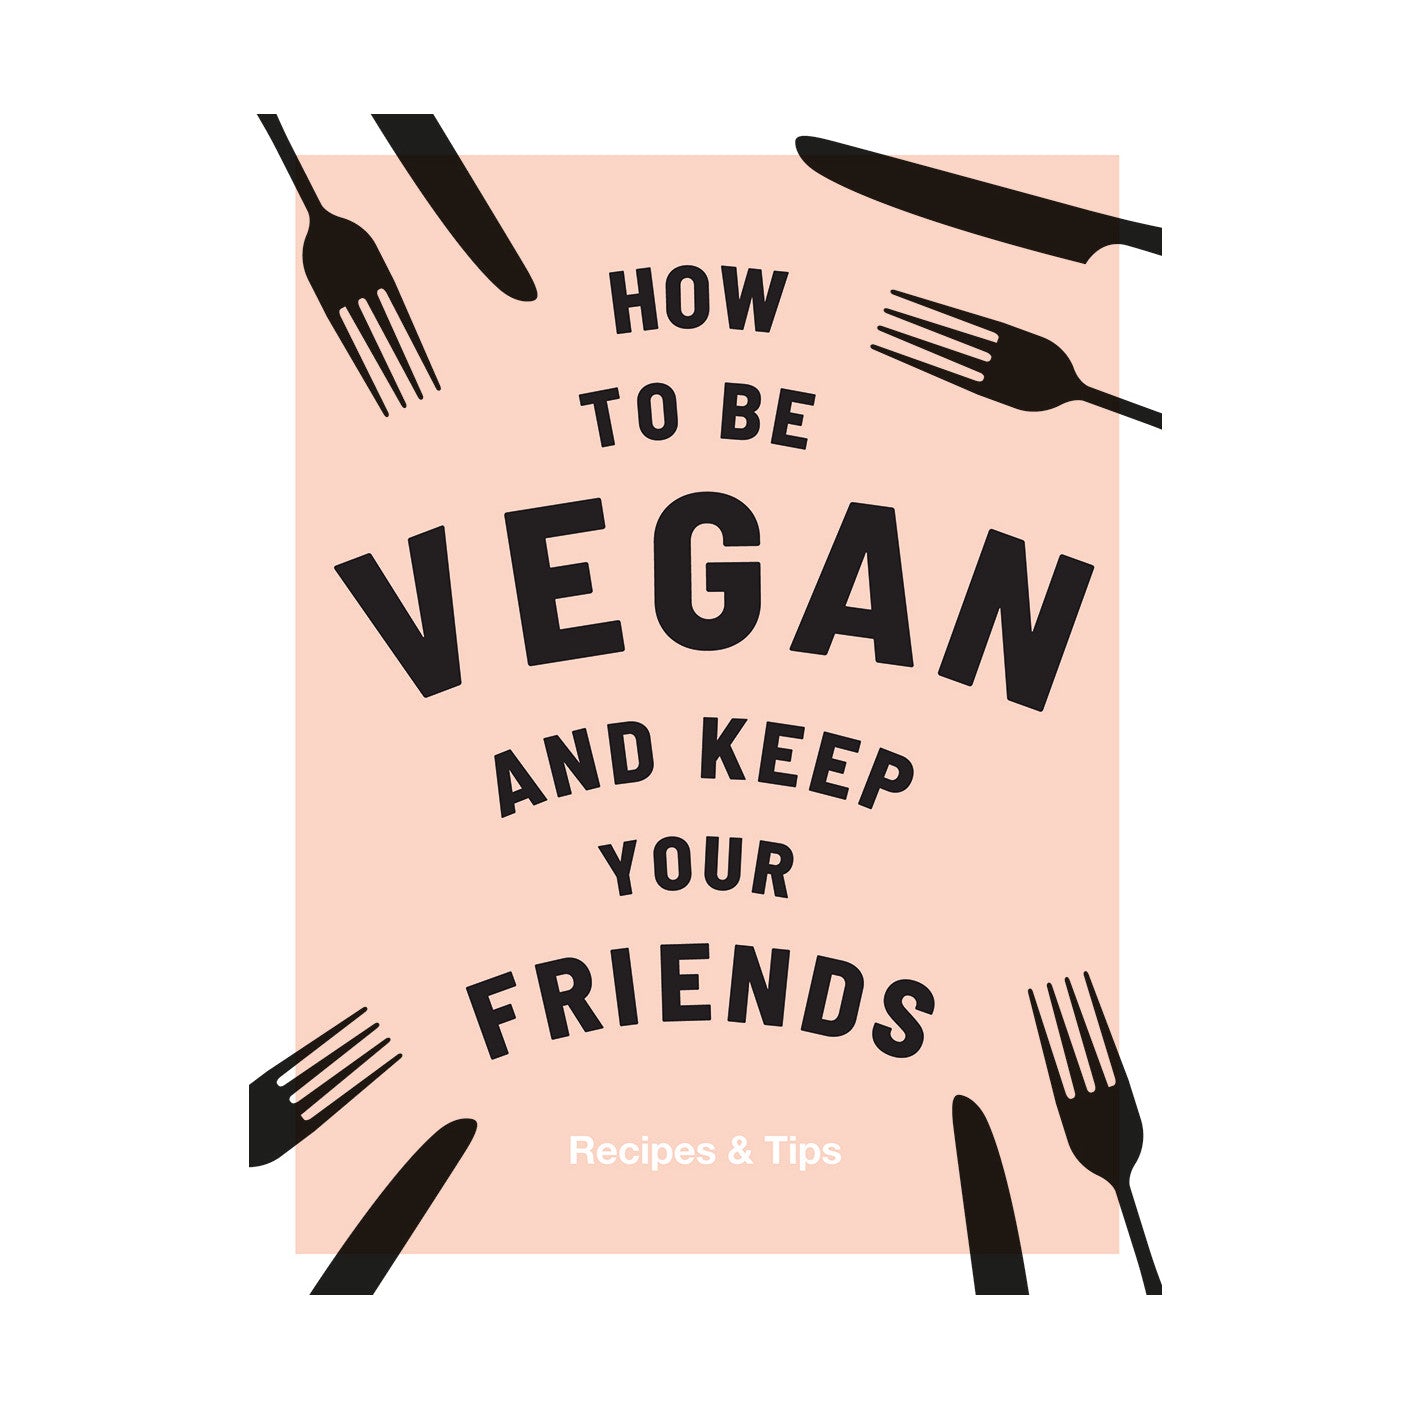 How to be vegan and keep your friends - Annie Nichols cookbook